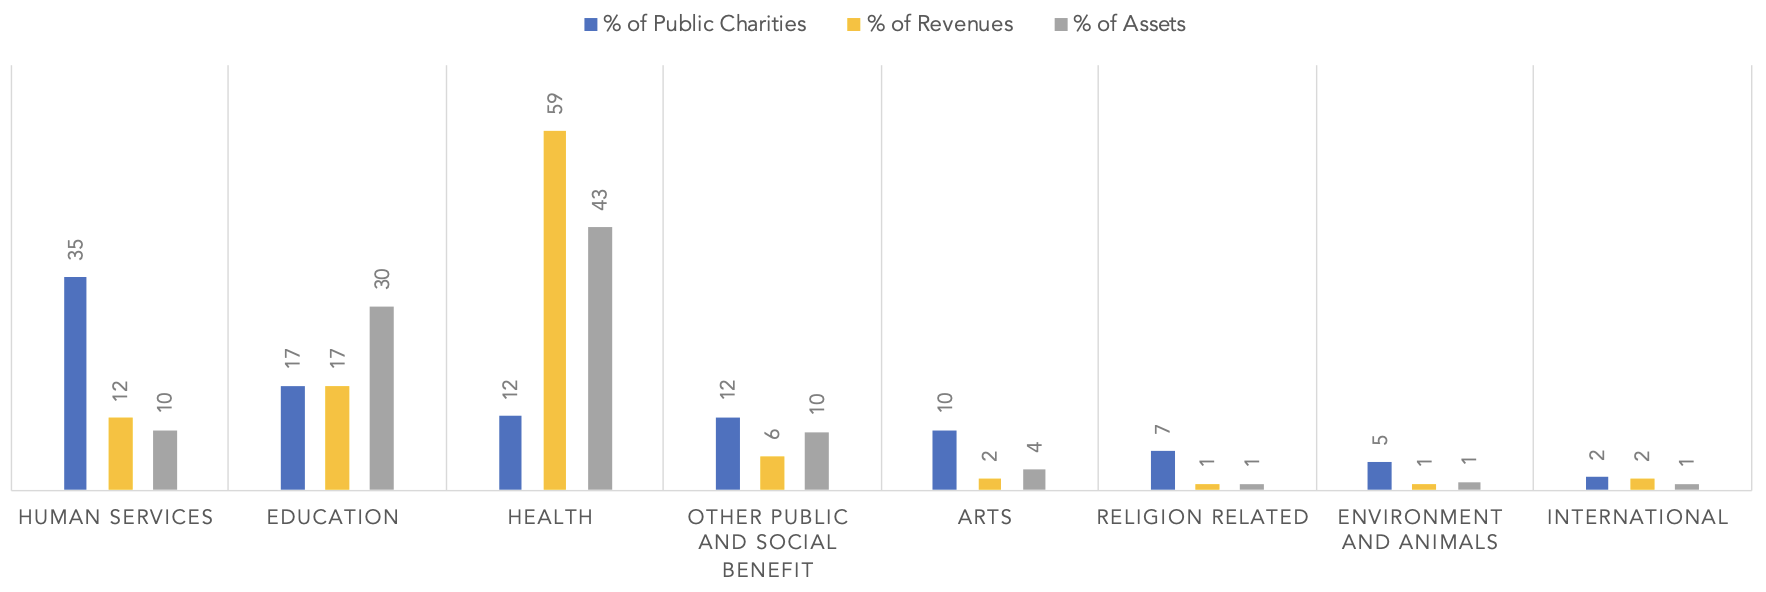 Bar graph of public charities revenues and assets by subsector as a percentage of all public charities, revenues, and assets. Subsectors include human services, education, health, other public and social benefit, arts, religion related, environment and animals, and international.